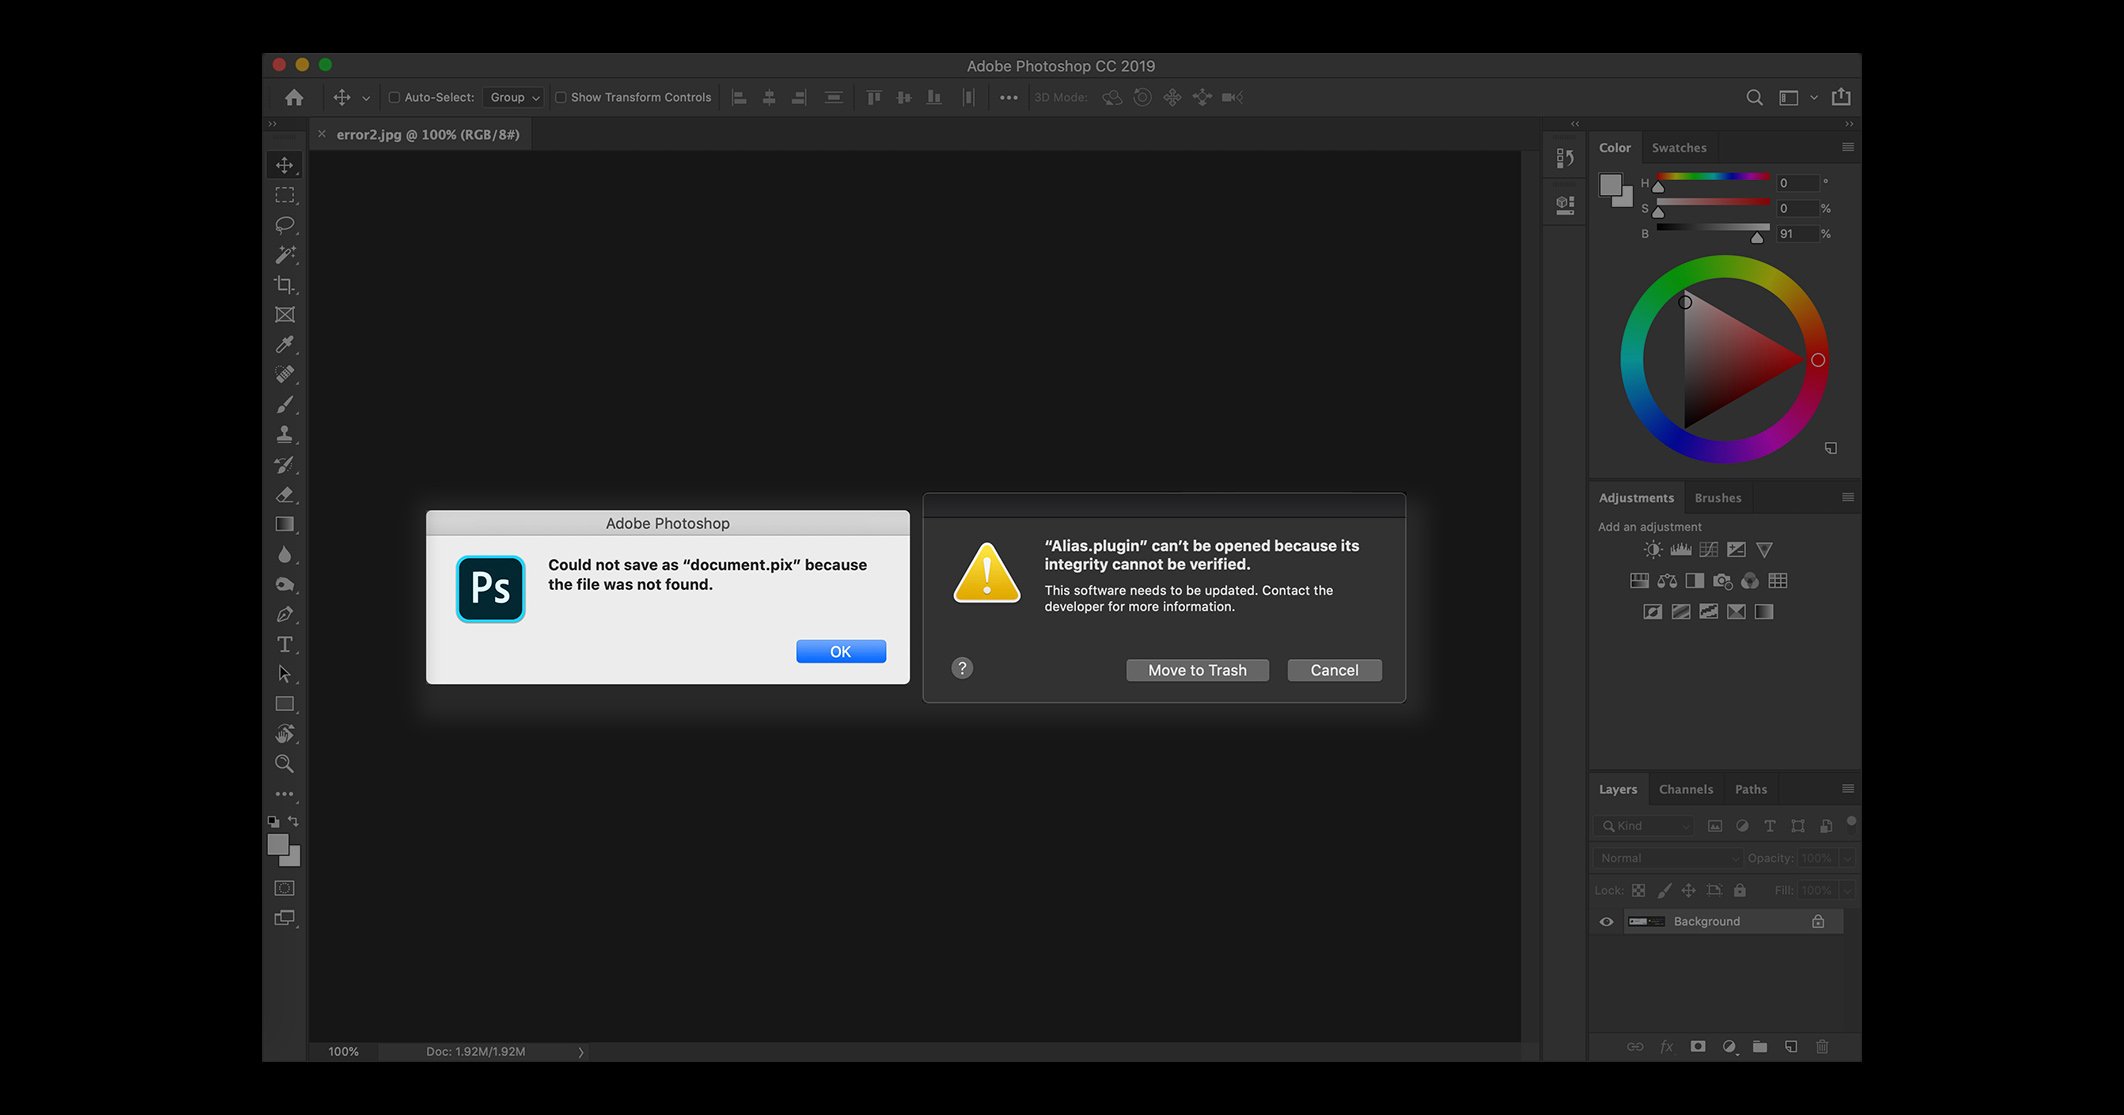 Don't Update to macOS Catalina Yet if You Use Photoshop or